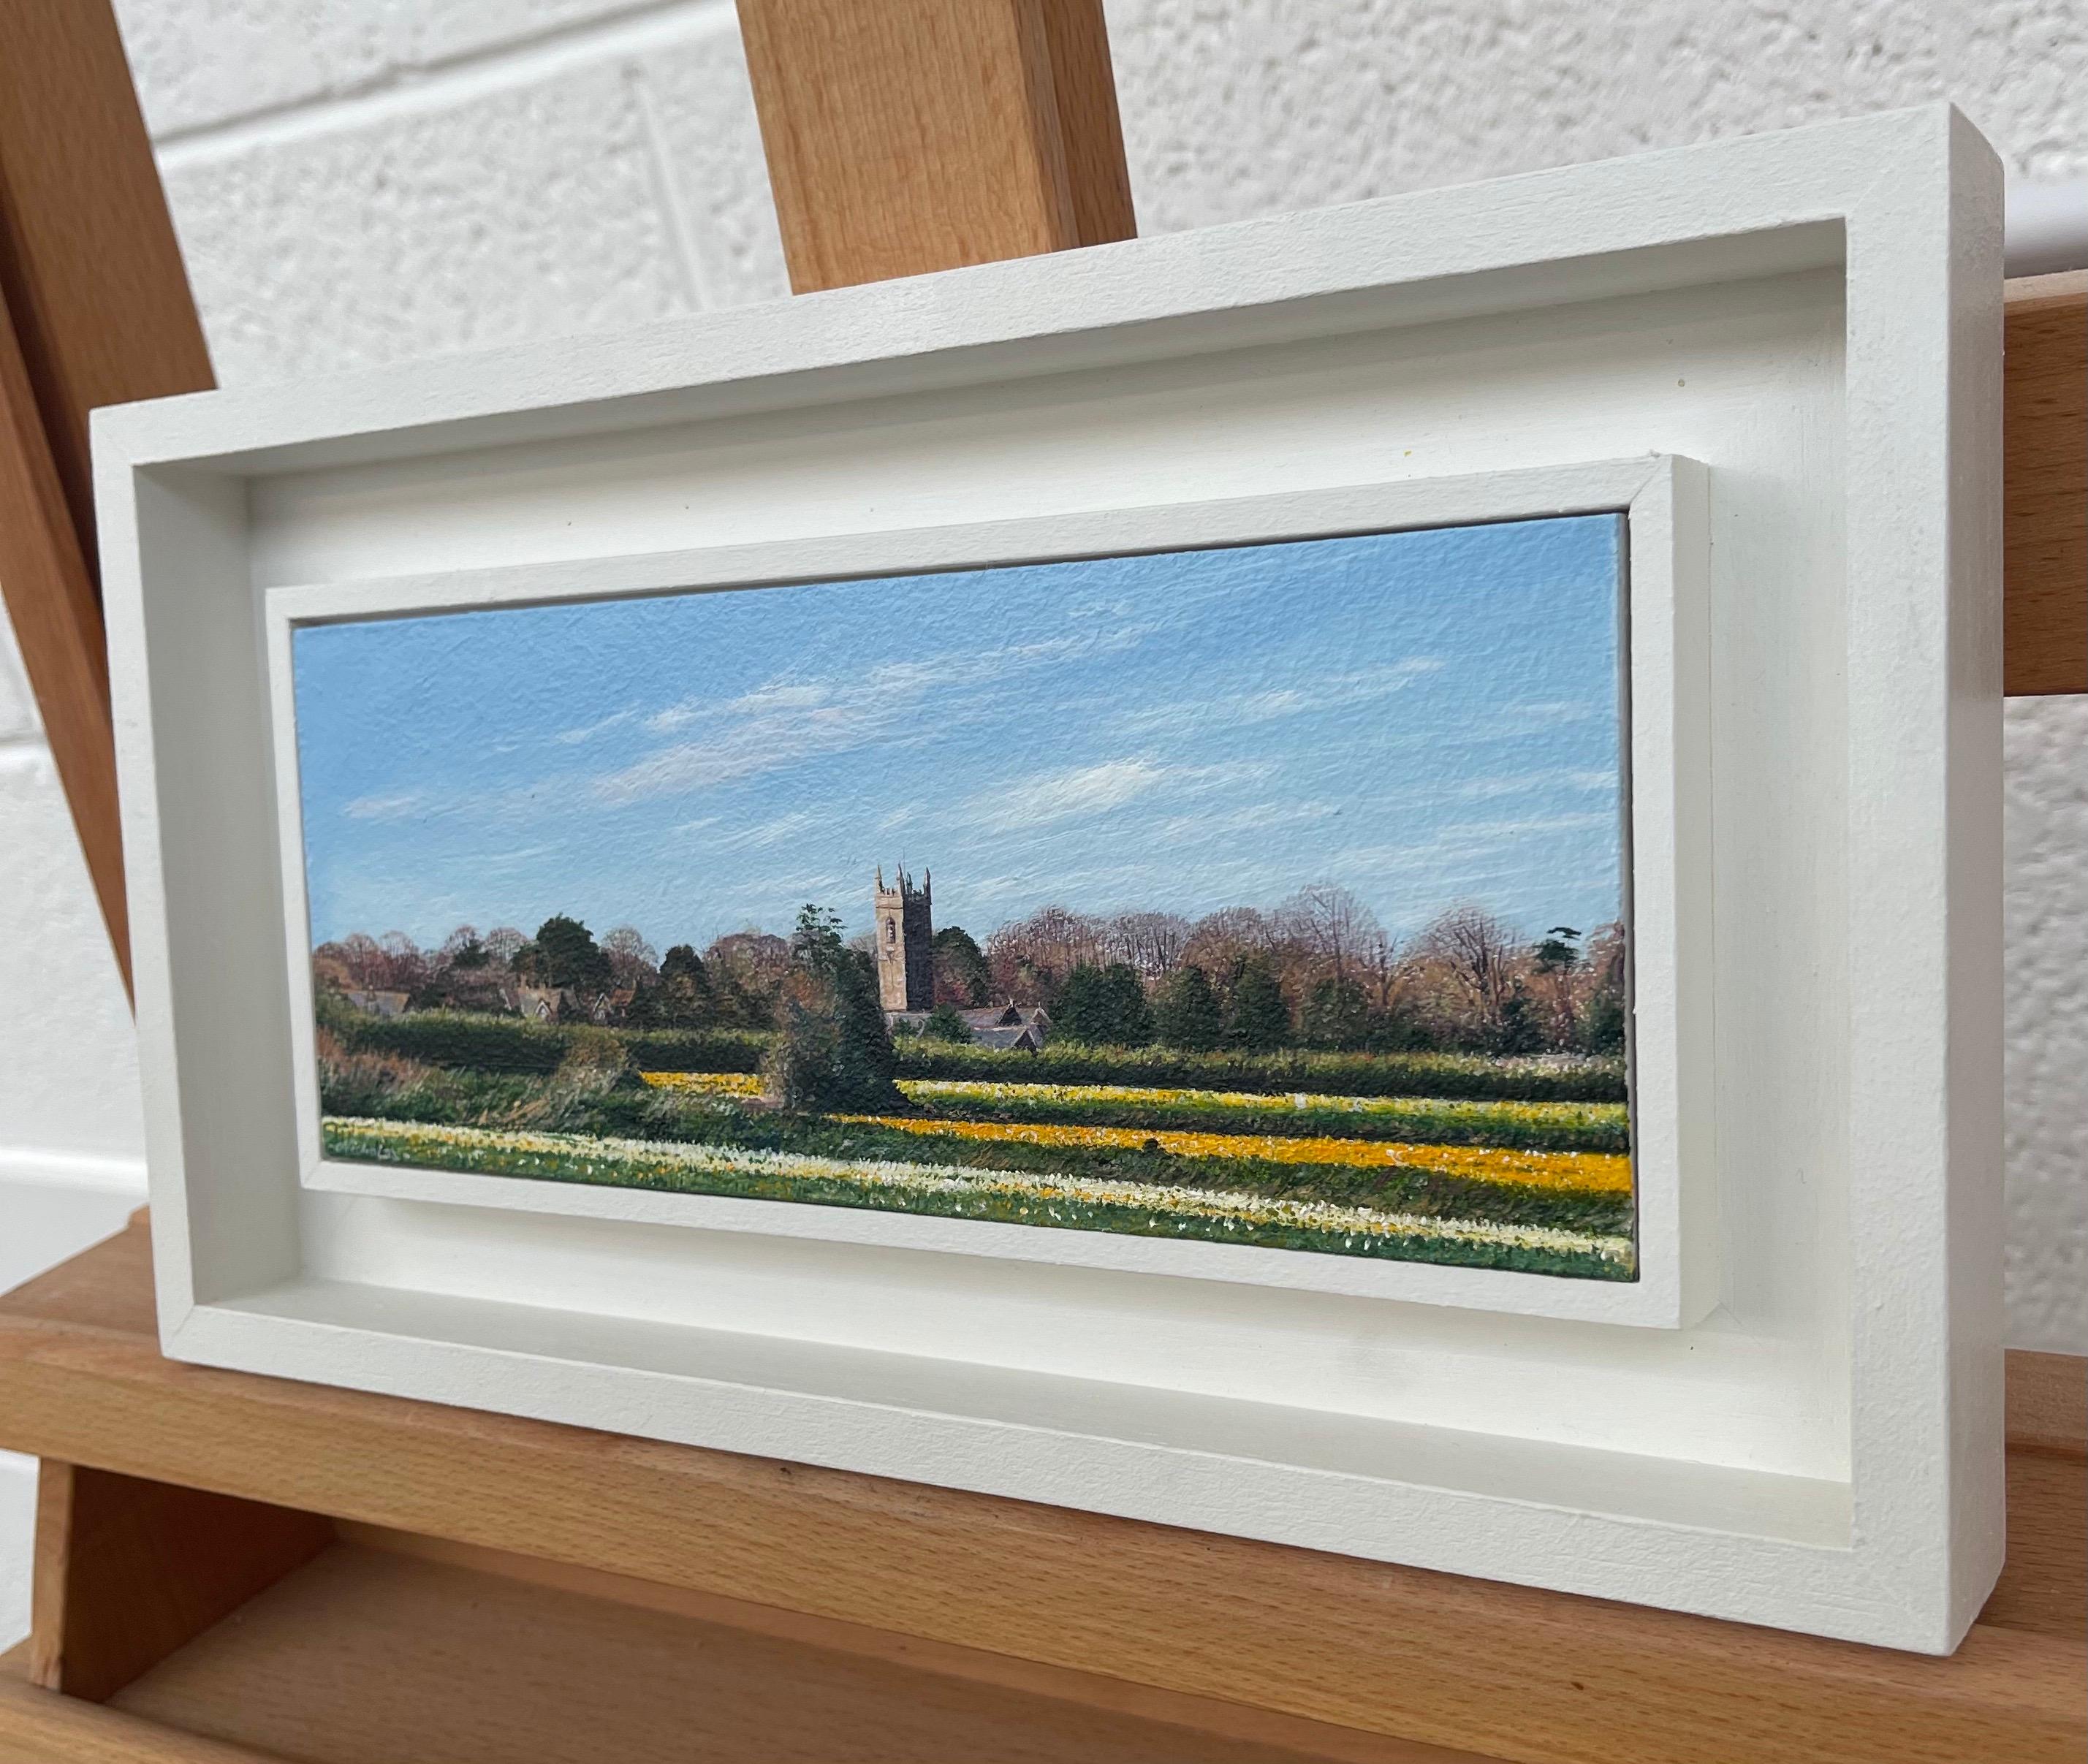 Daffodil Fields English Landscape Painting by Contemporary Photorealist Artist, Nicholas Smith. 

Art measures 8.5 x 3.5 inches
Frame measures 11.5 x 6.5 inches  

Born December 1960, the son of one of Britain’s foremost landscape artists, Caesar